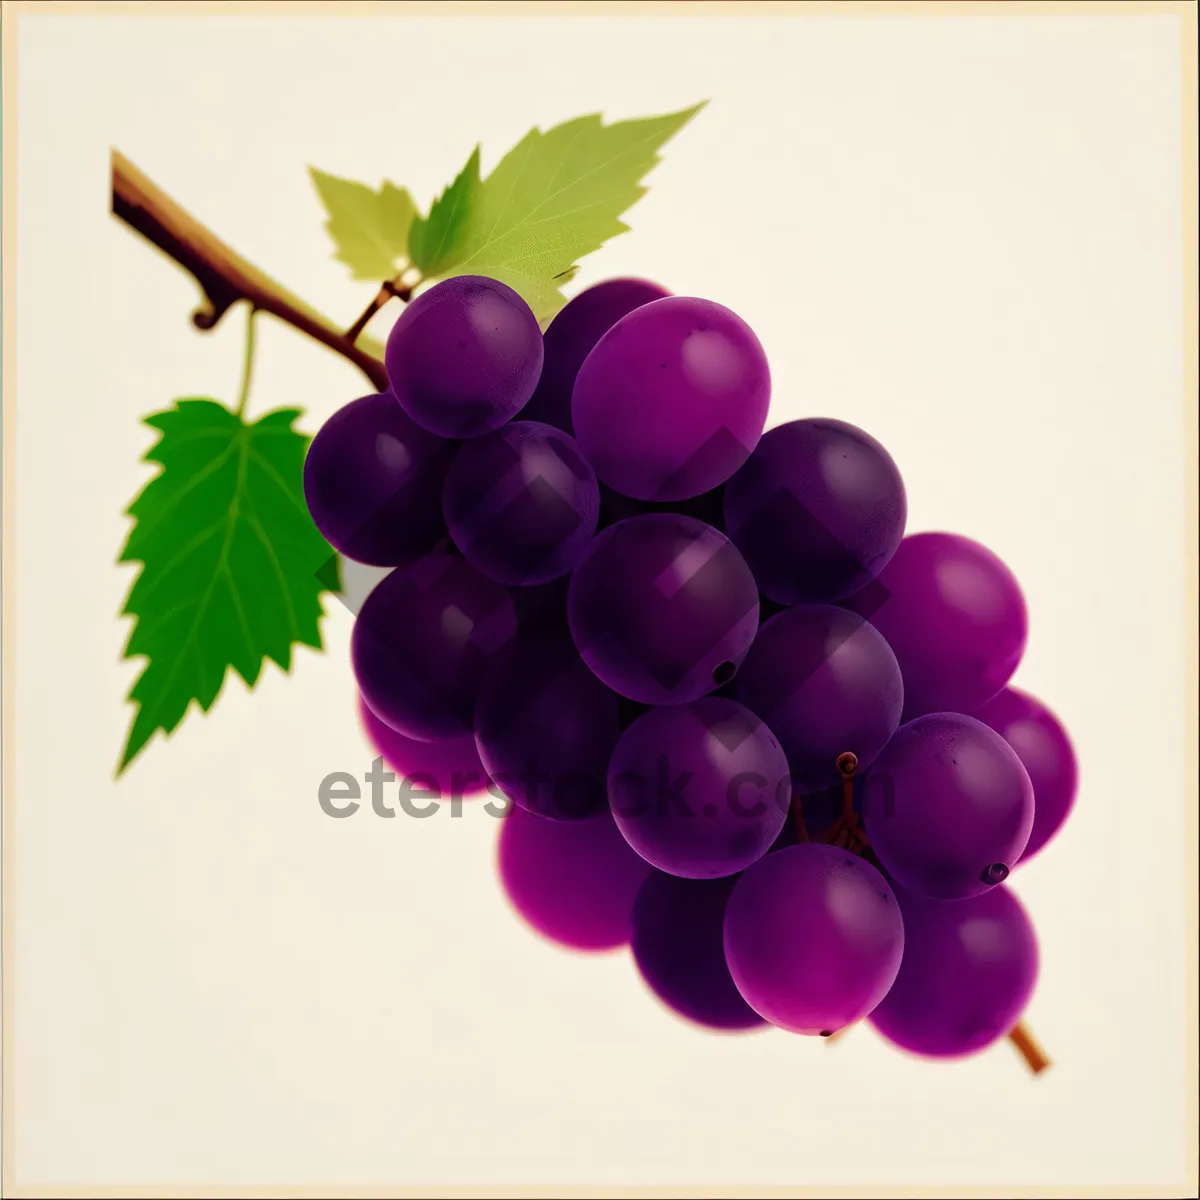 Picture of Ripe and Juicy Purple Grapes in Vineyard